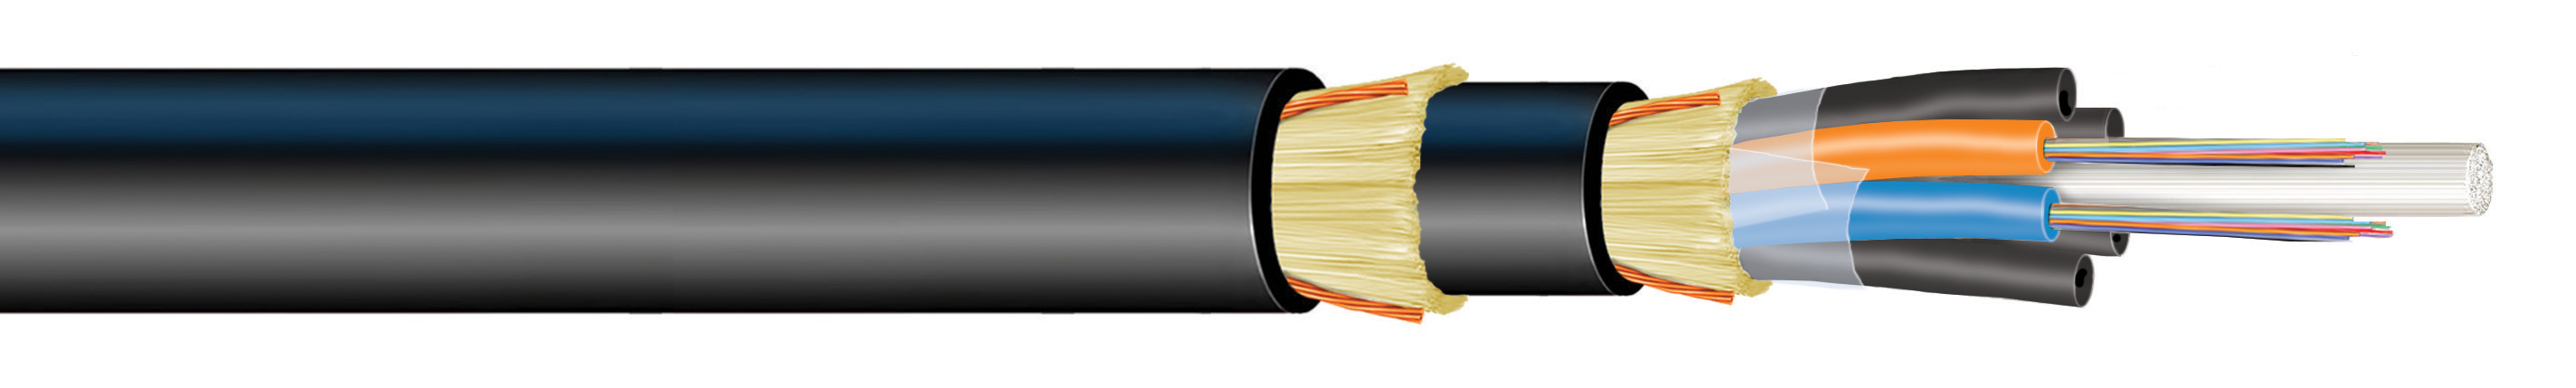 AIRGUARD® XP Harsh Environment Chemical Resistant Fiber Optic Cable CAN